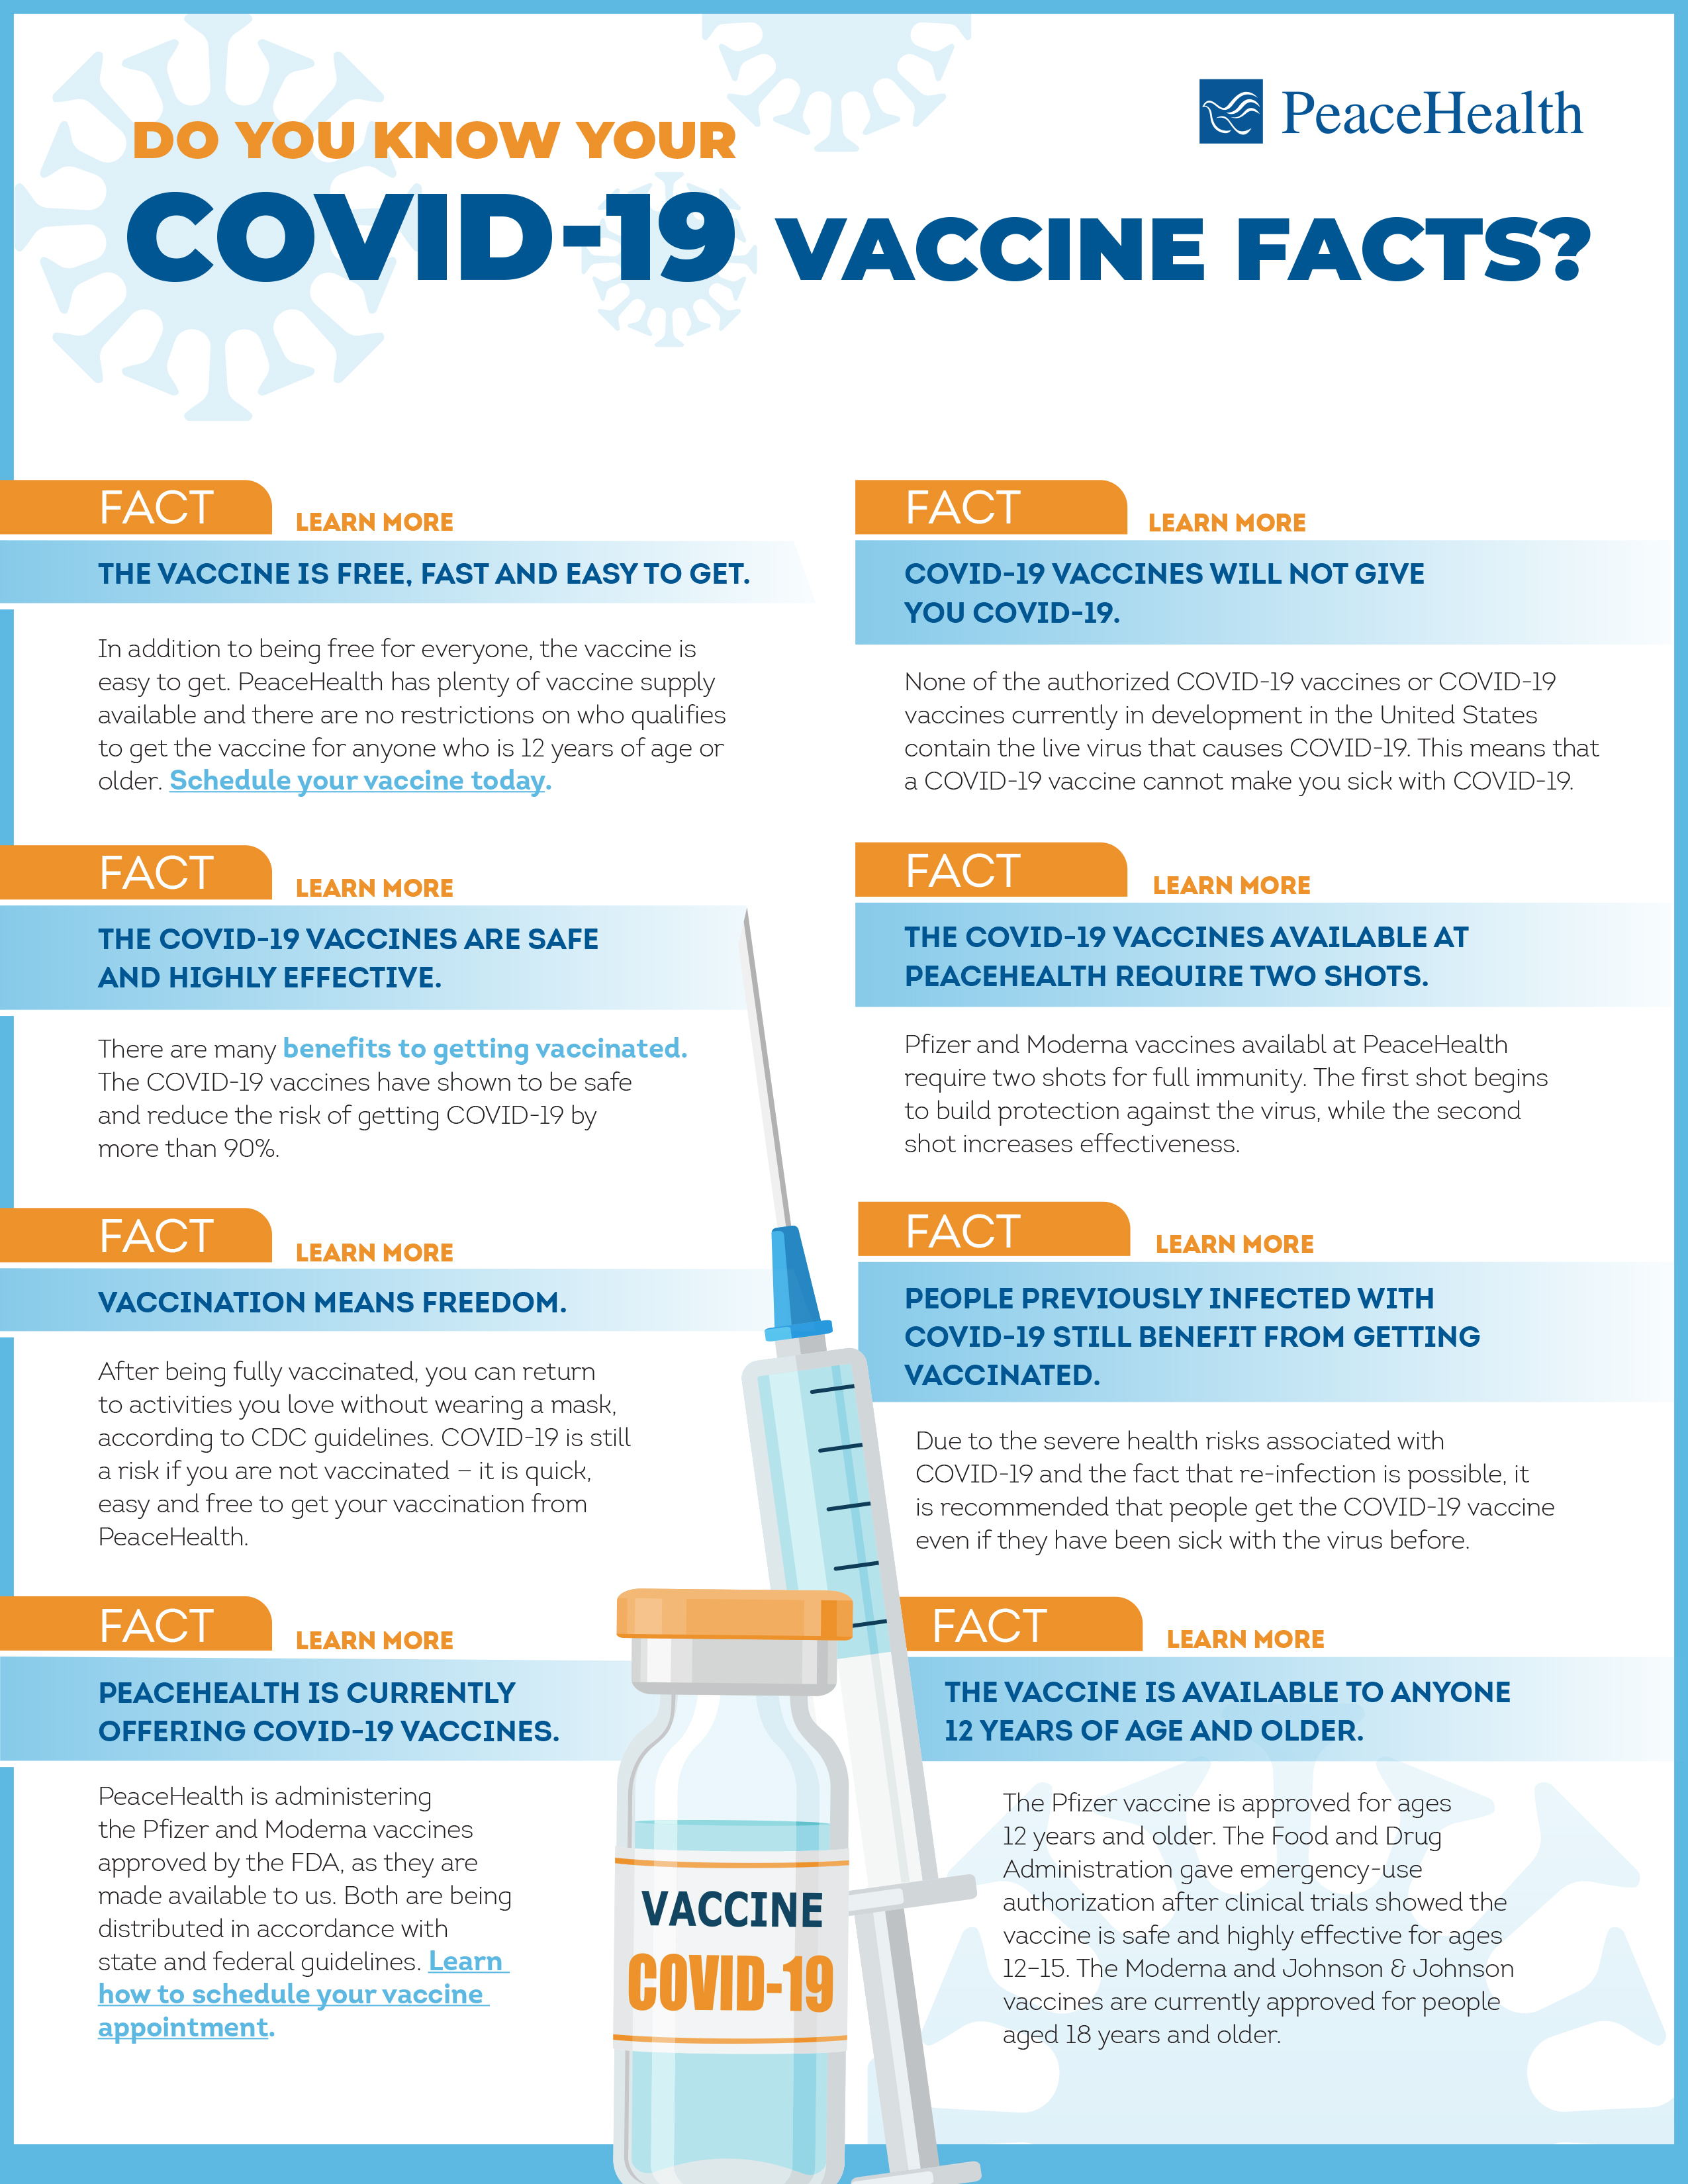 Fact sheet on COVID-19 vaccinations for adults